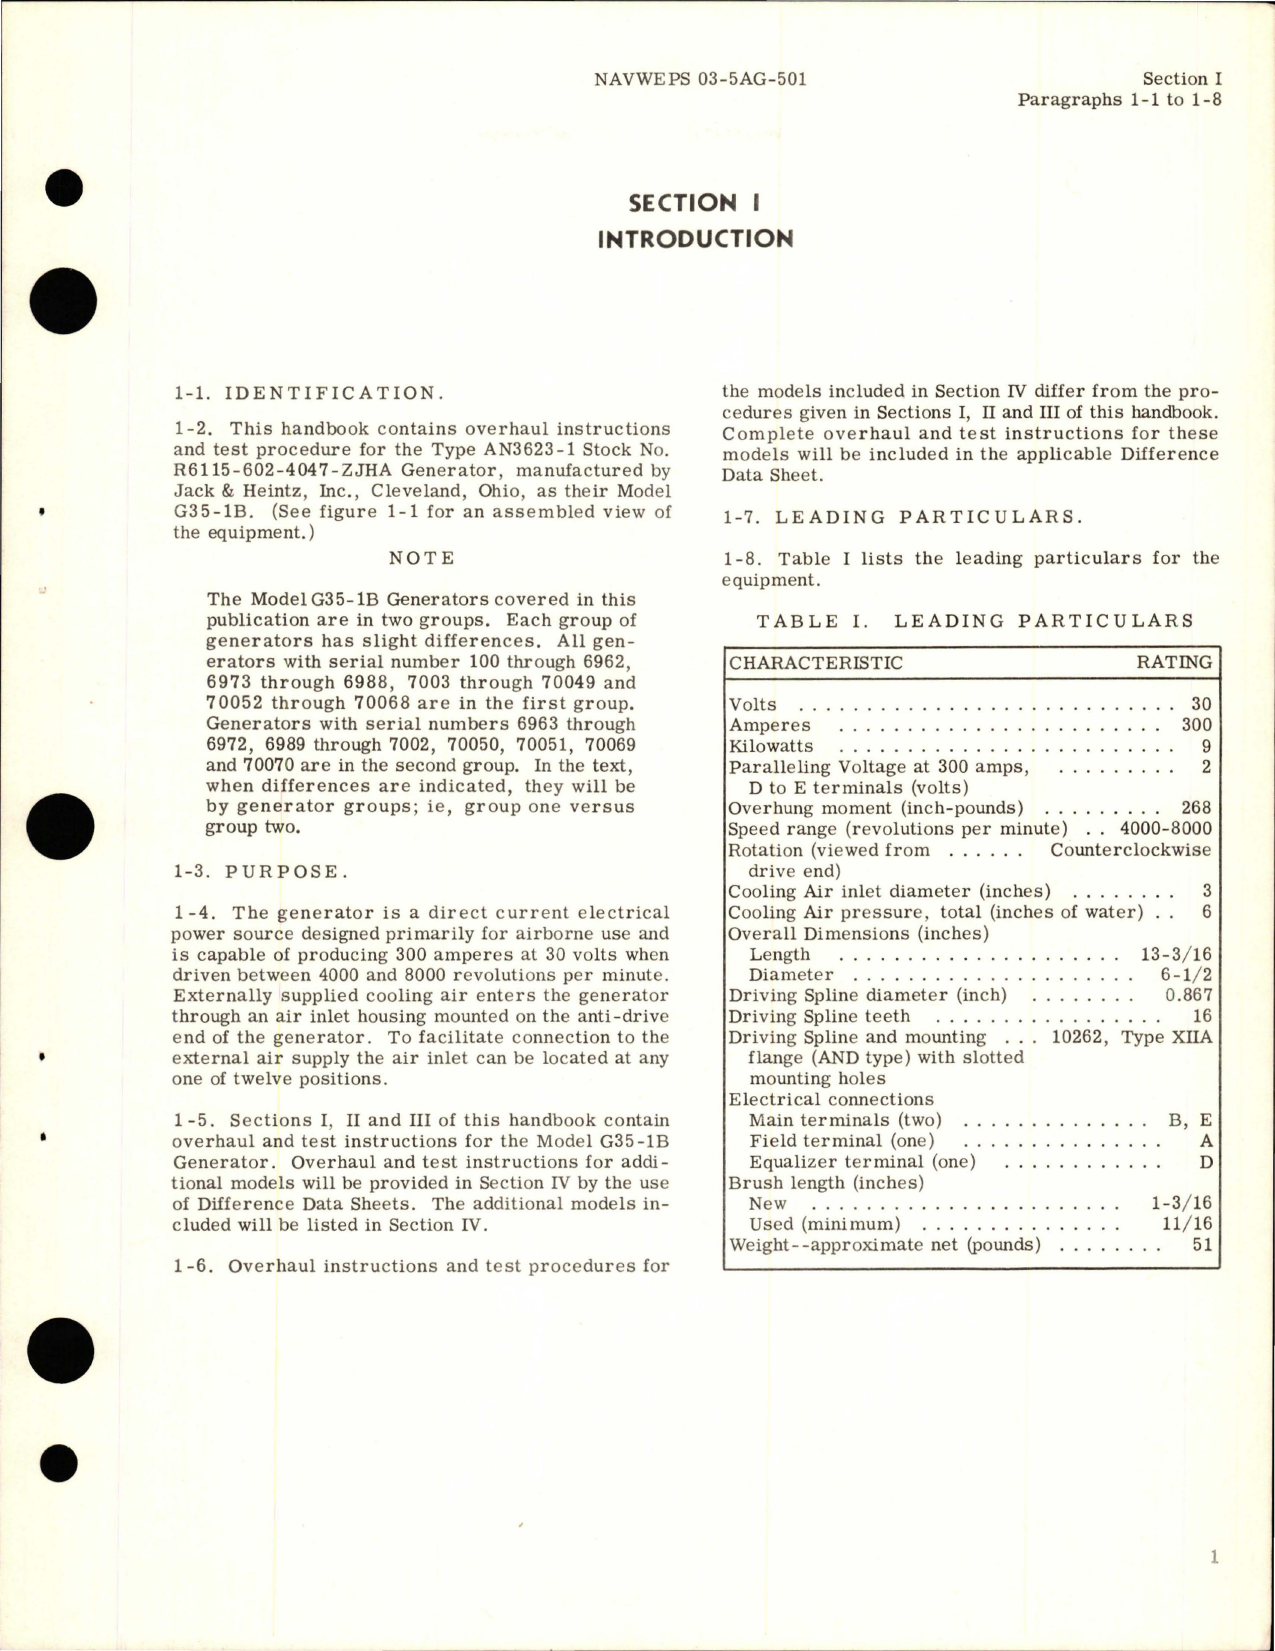 Sample page 5 from AirCorps Library document: Overhaul Instructions for Generator - Type AN 3623-1 - Model G35-1B